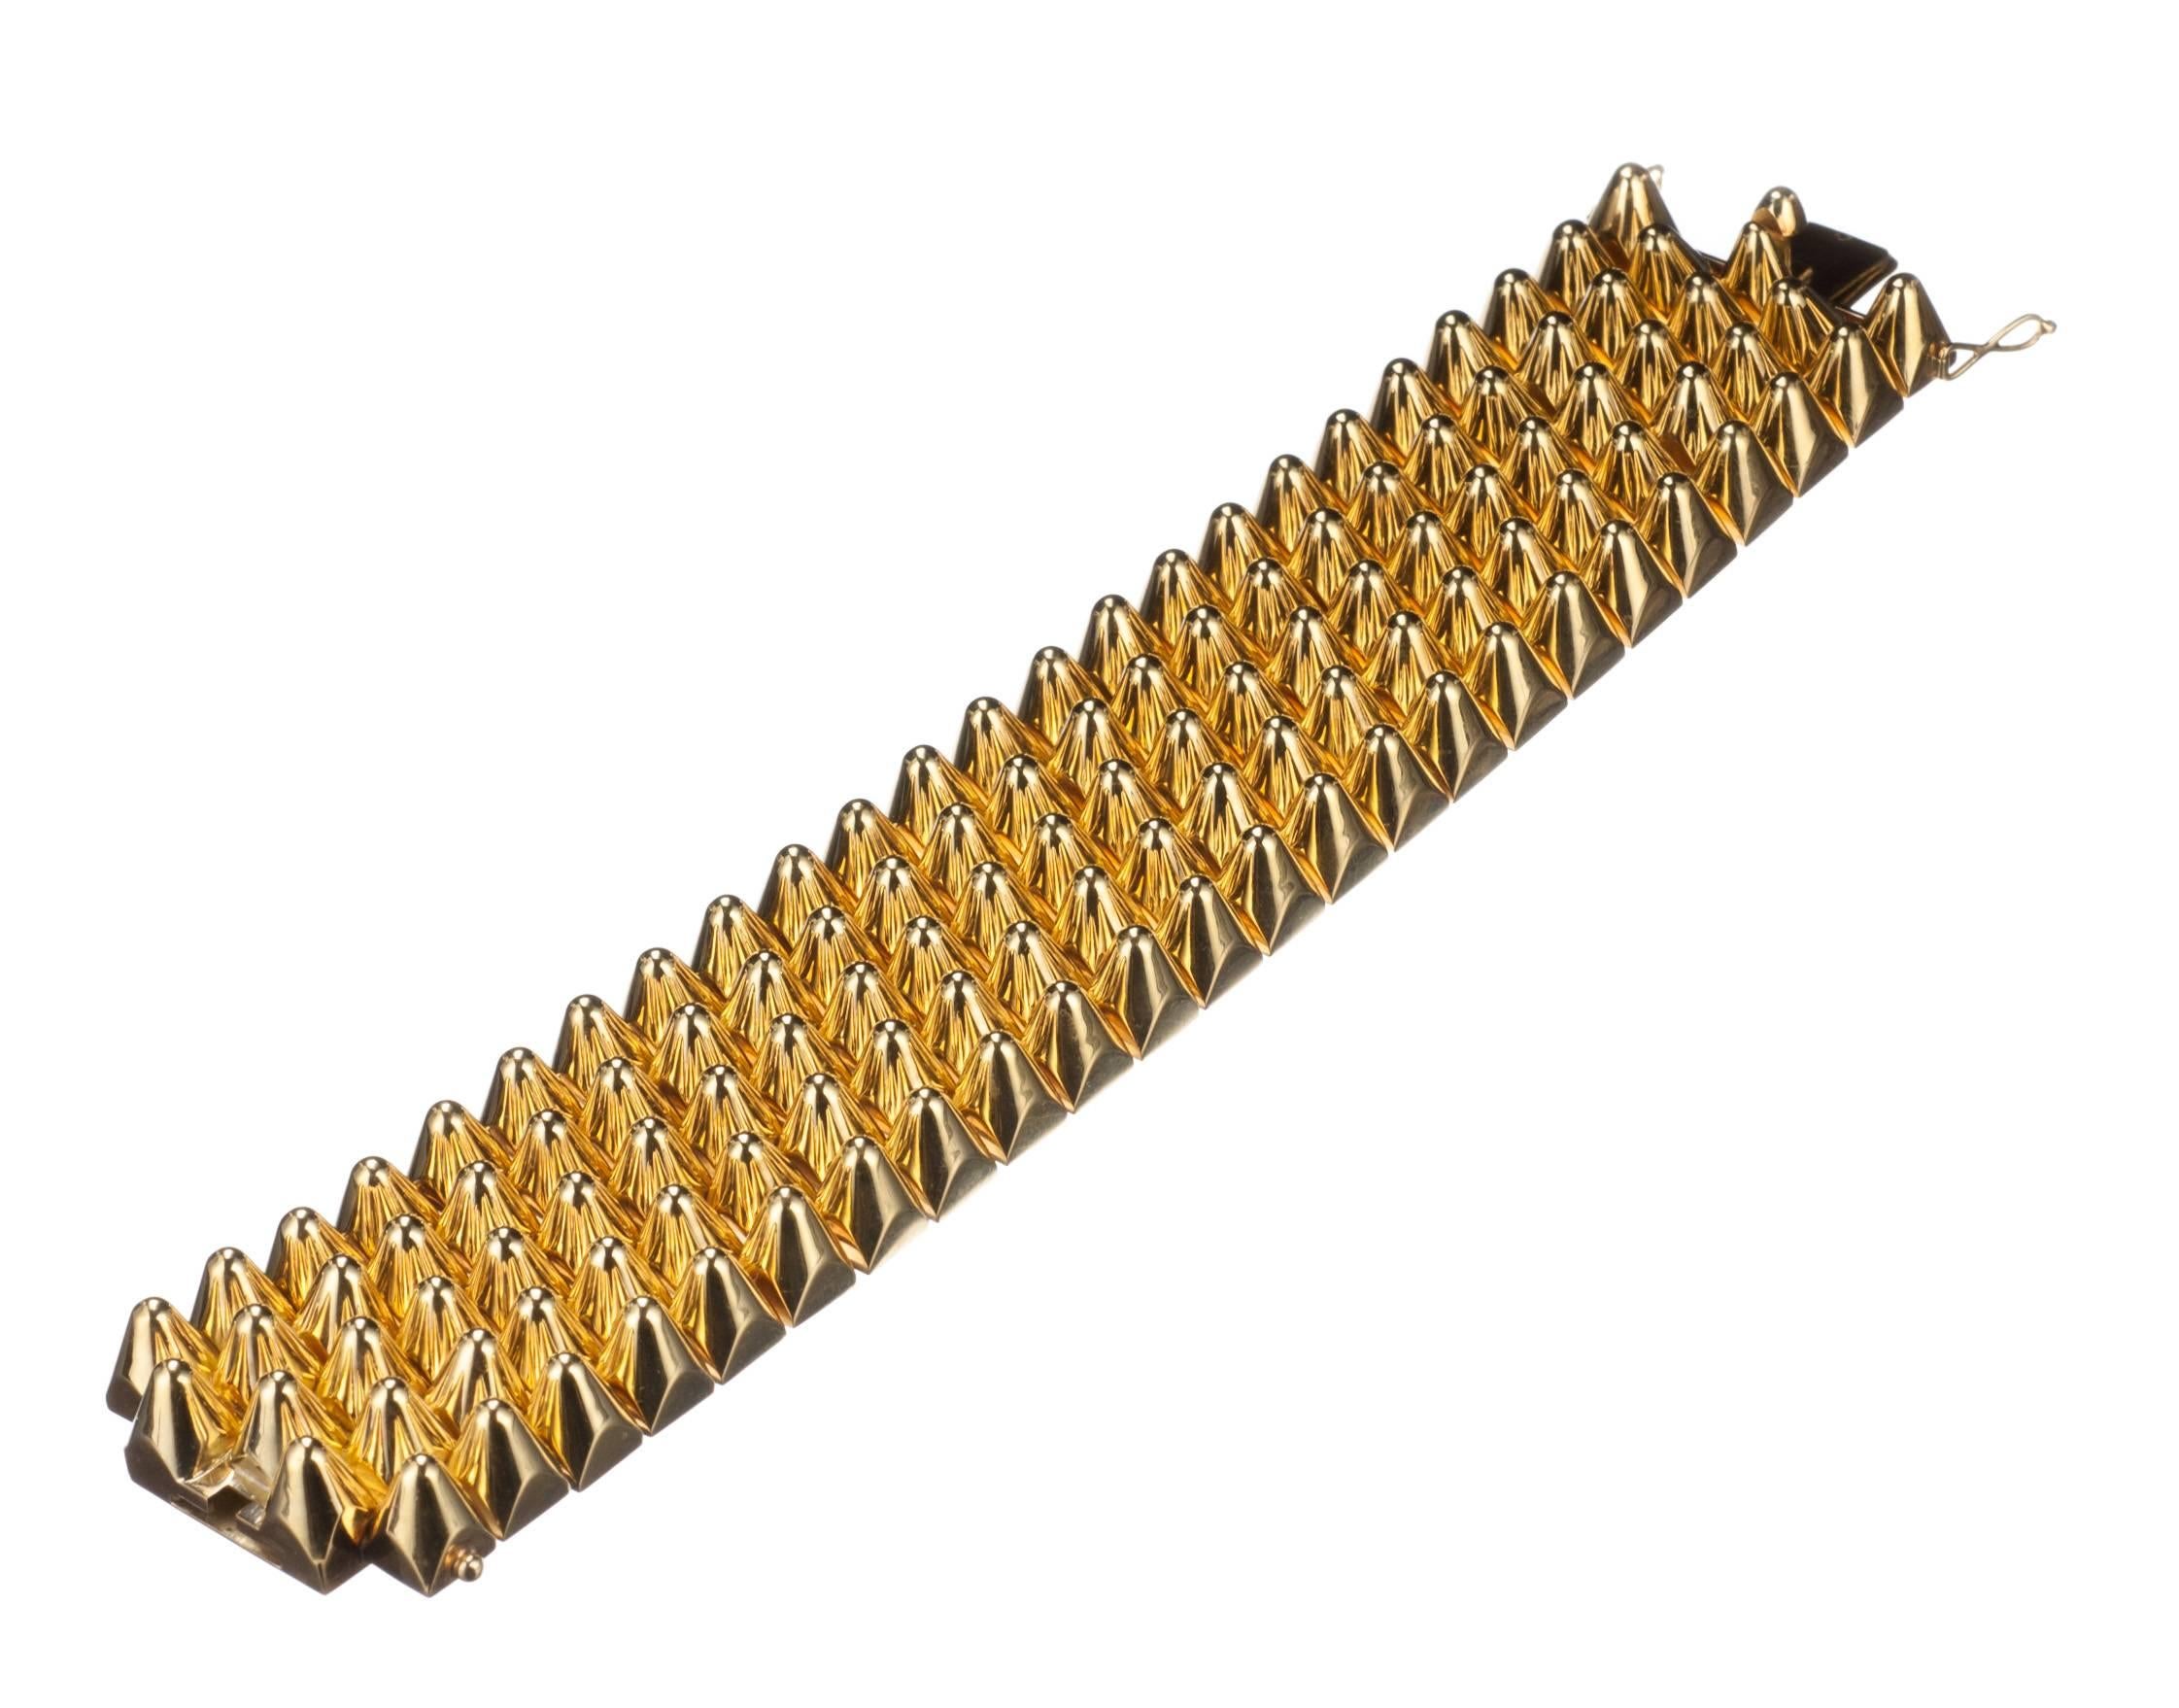 Solid, classic, and just a little bit edgy, this studded 18-karat yellow gold bracelet can’t help but make a bold statement. Each golden spike is linked together into a flexible, form fitting work of superb craftsmanship. Measures 1.5” wide and